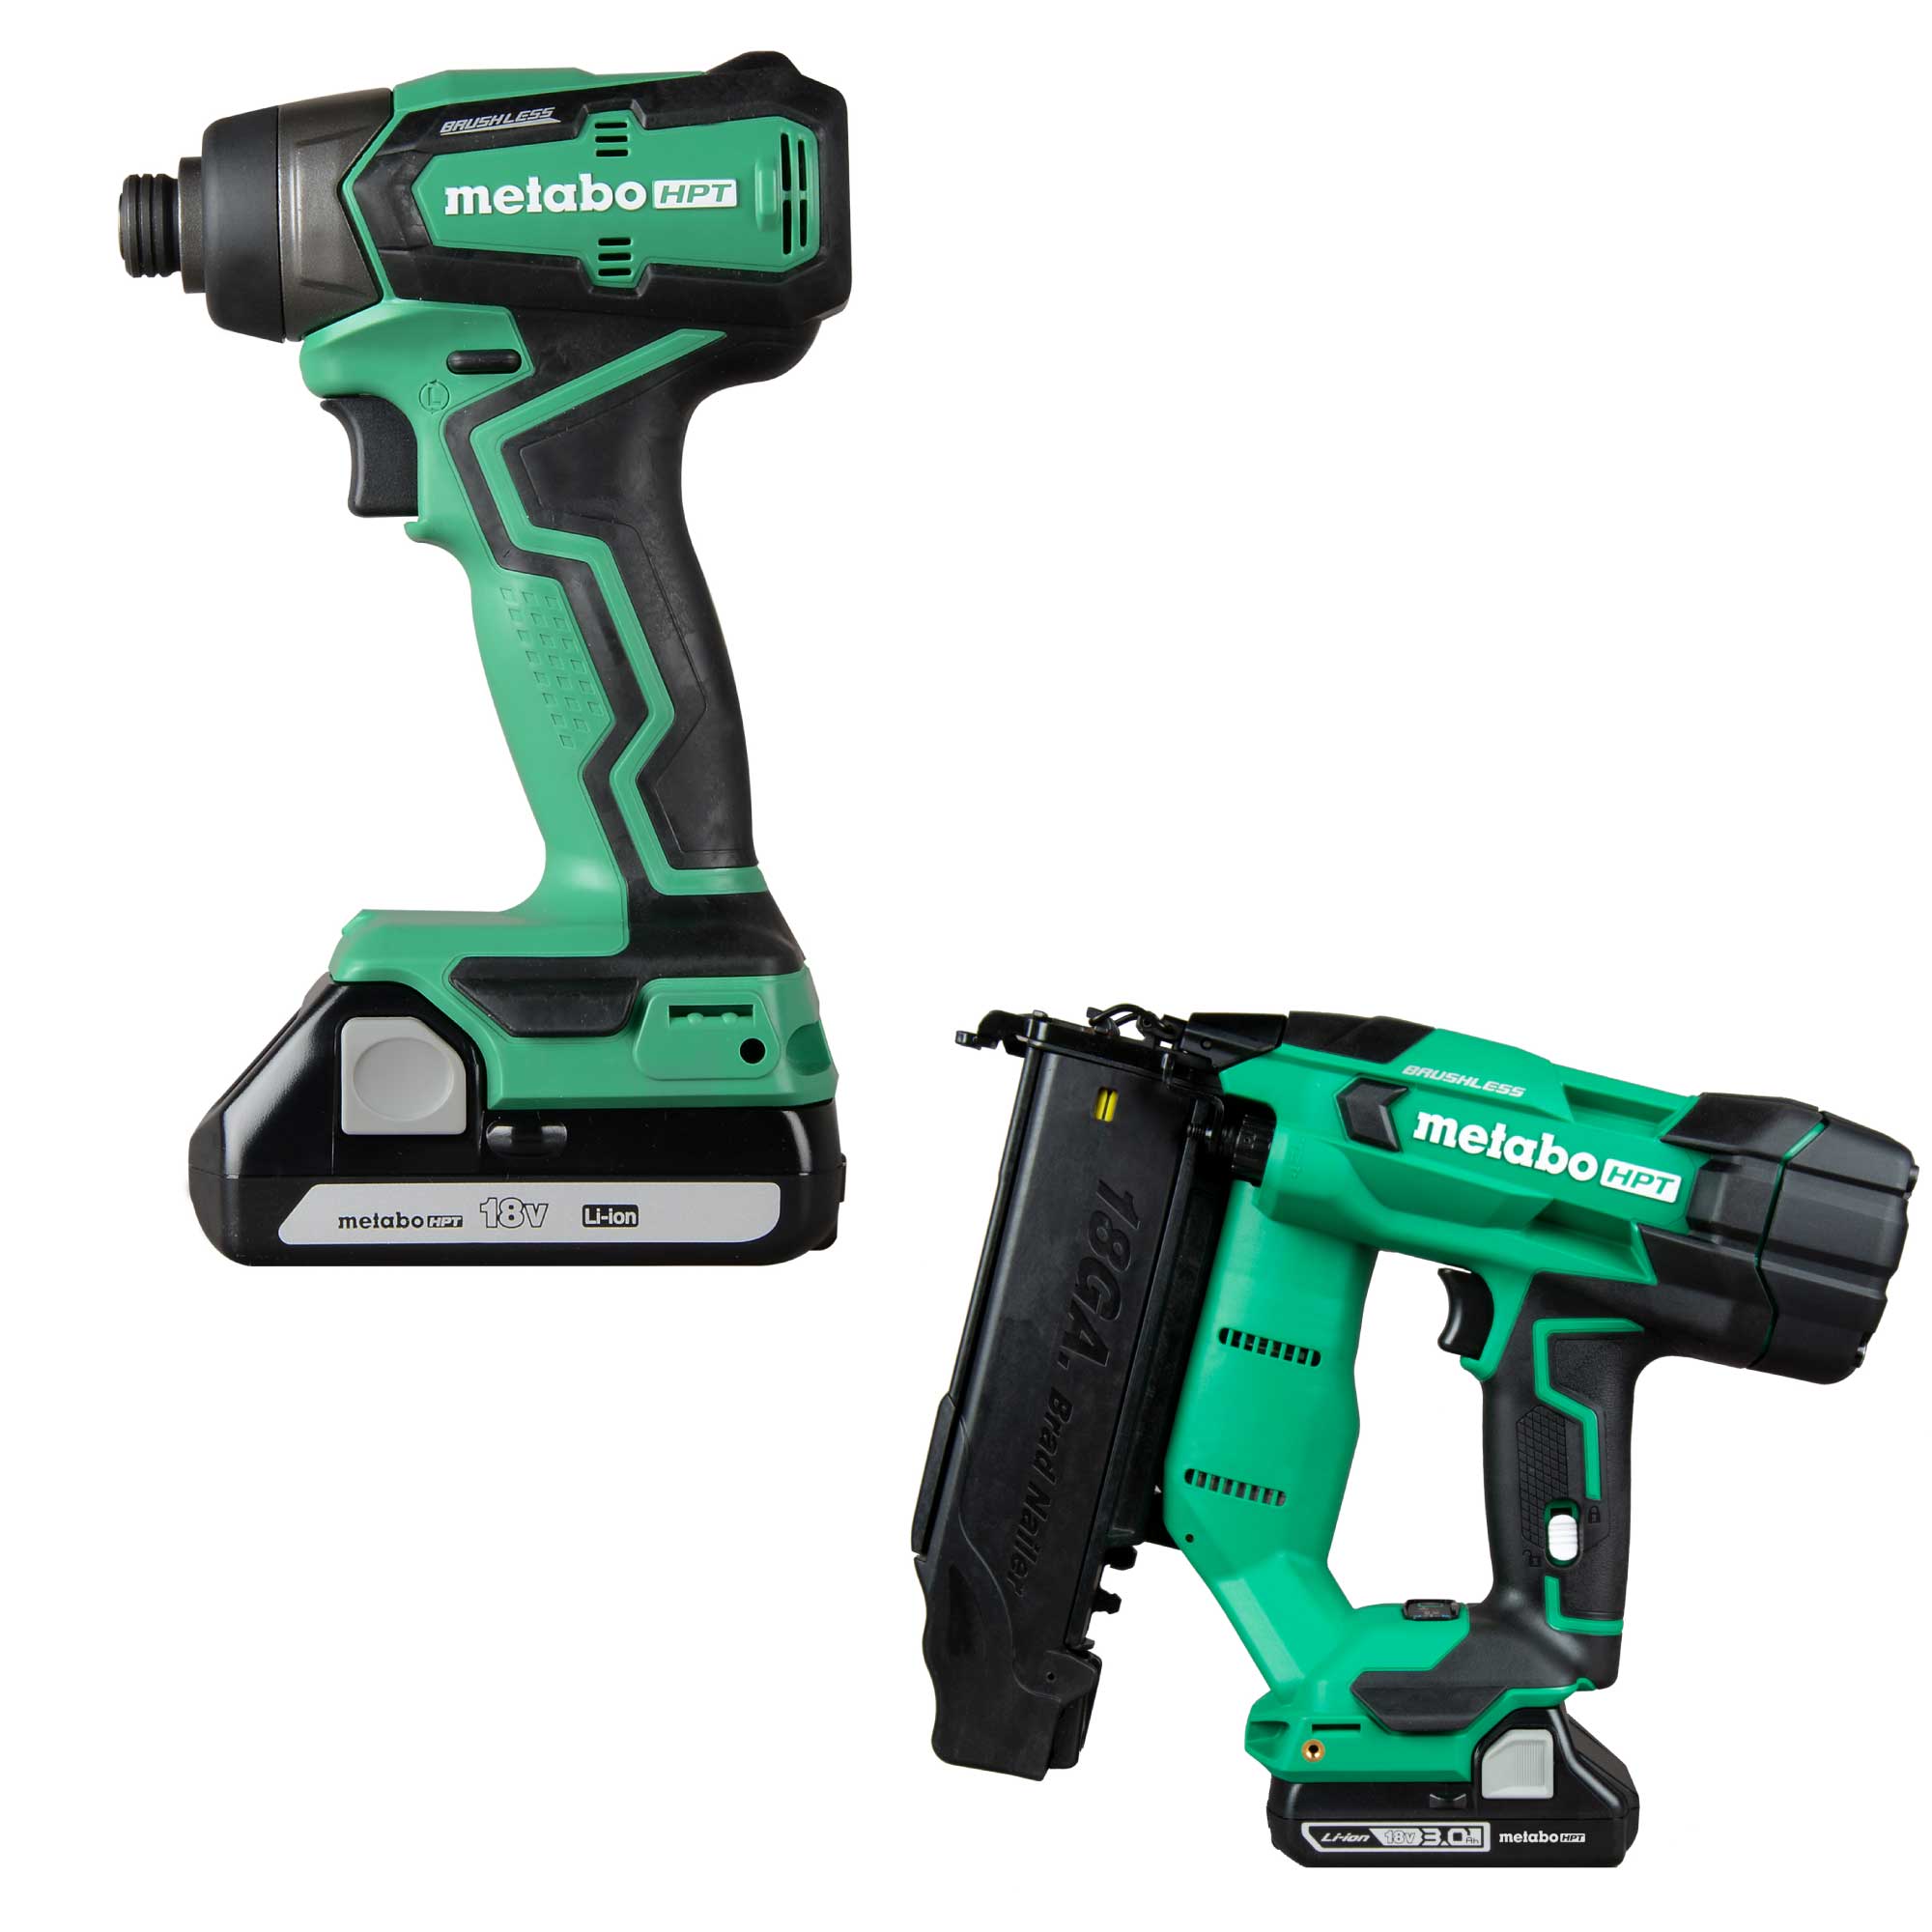 Metabo HPT MultiVolt 18-volt 1/4-in Variable Speed Brushless Cordless Impact Driver (2-batteries included) with MultiVolt 18-Gauge 18-volt Cordless